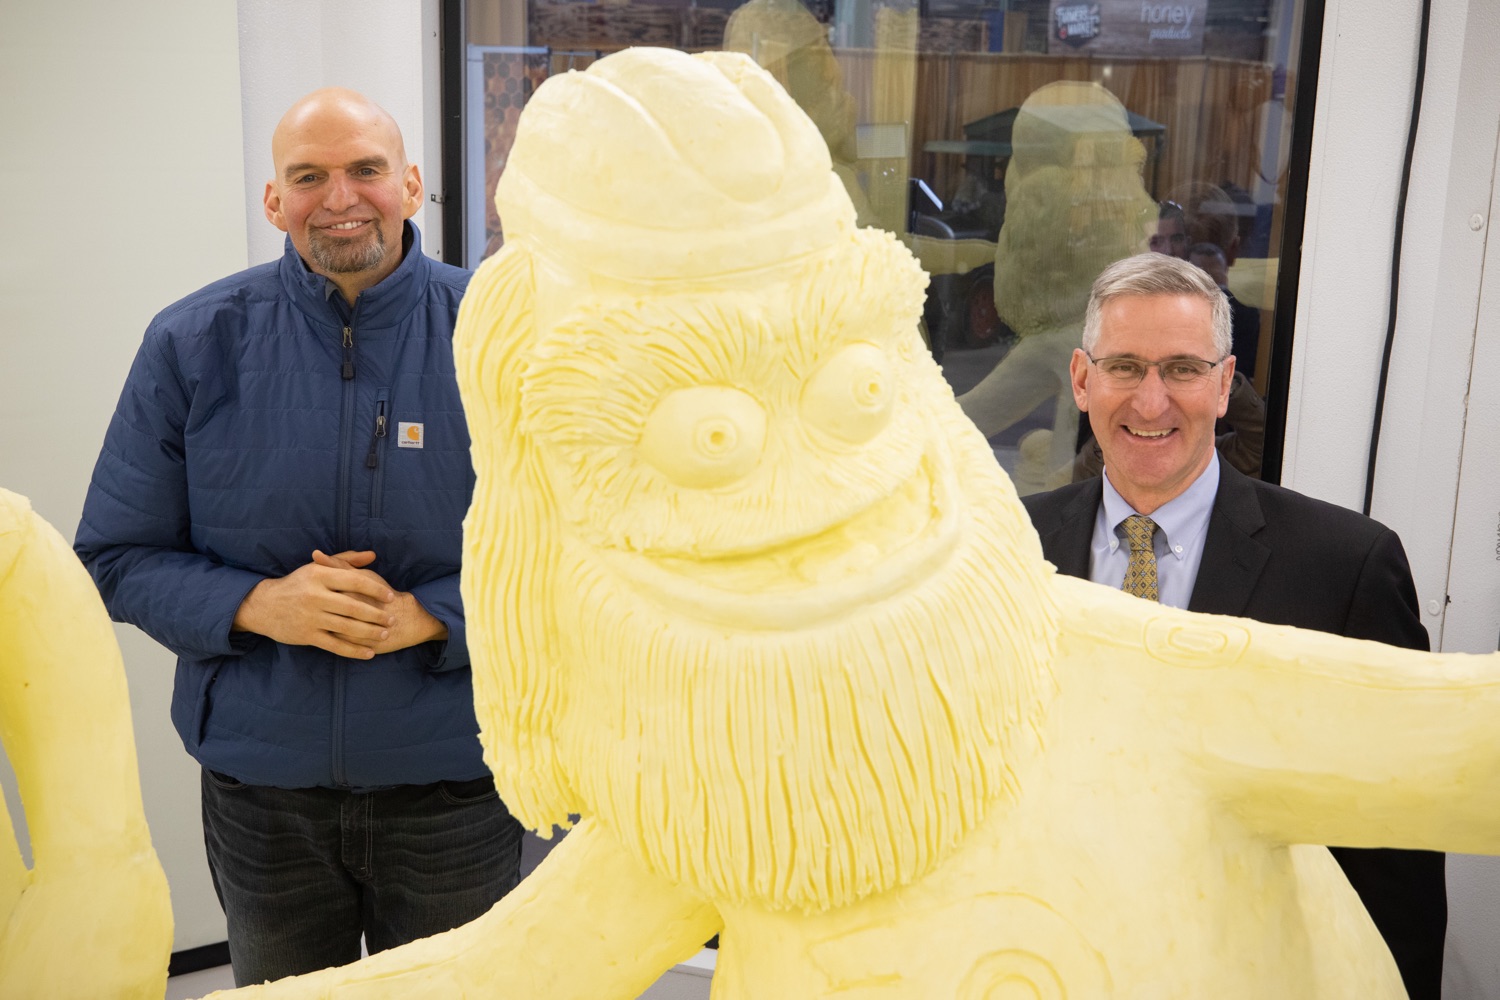 Lt. Governor John Fetterman,  and Secretary of Agriculture Russell Redding at the Pennsylvania Farm Show butter sculpture.  Lt. Governor John Fetterman and Secretary of Agriculture Russell Redding today unveiled the 2020 Pennsylvania Farm Show butter sculpture, carved from a half-ton of butter depicting three of Pennsylvanias beloved professional sports mascots: Philadelphia Flyers Gritty, Philadelphia Eagles Swoop, and Pittsburgh Steelers Steely McBeam celebrating with a spread of Pennsylvania dairy products. The sculpture, a long-time Farm Show staple, encourages Pennsylvanians to be a fan of Pennsylvania dairy and give a cheer to the more than 6,200 dairy farmers in the commonwealth.  Harrisburg, PA  January 2, 2020<br><a href="https://filesource.amperwave.net/commonwealthofpa/photo/17646_agric_butter_sculpture_dz_023.jpg" target="_blank">⇣ Download Photo</a>